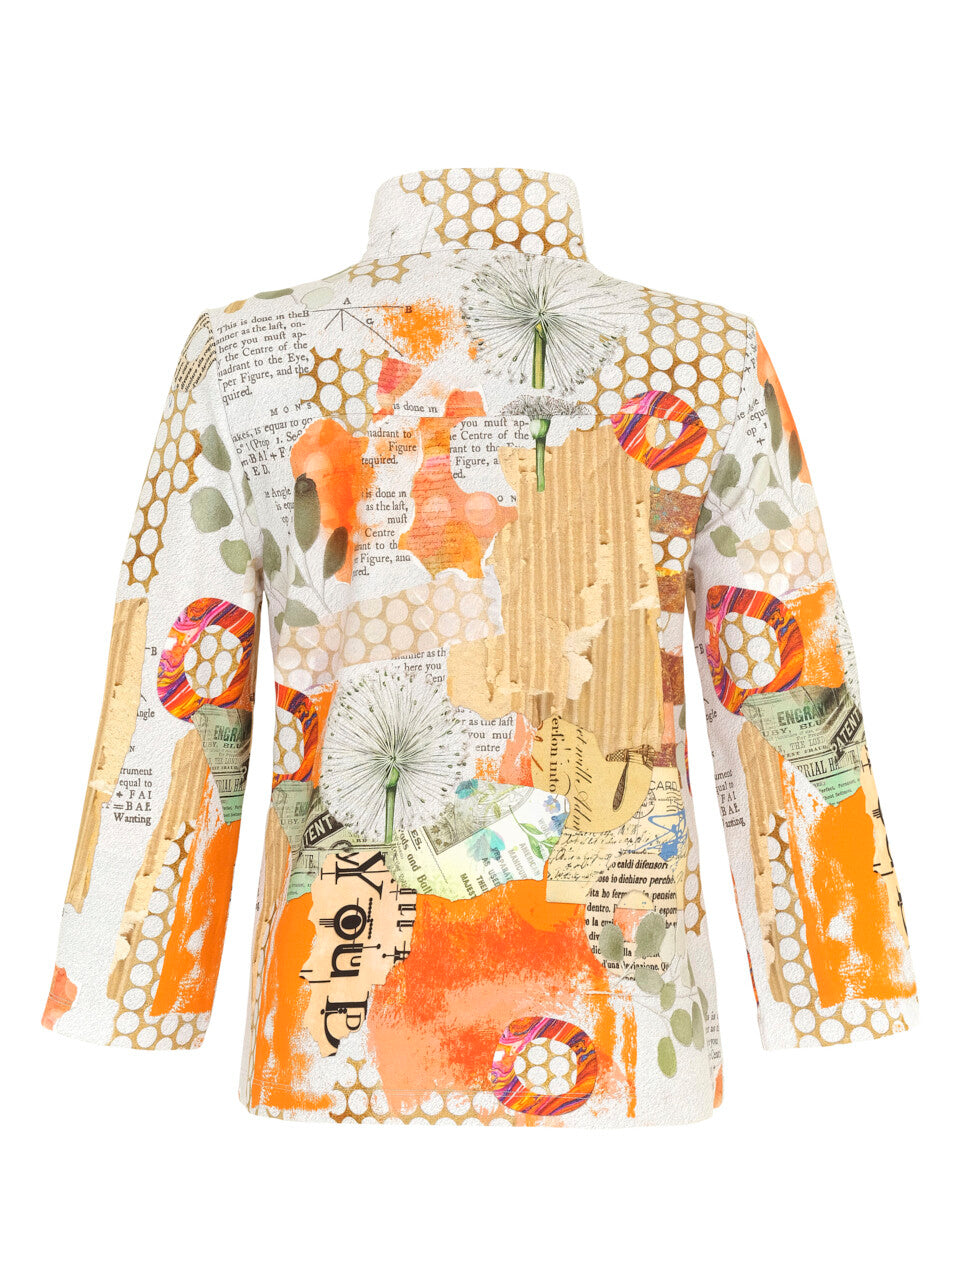 Dolcezza Simply Art Gina Startup Big Changes Print Jacket